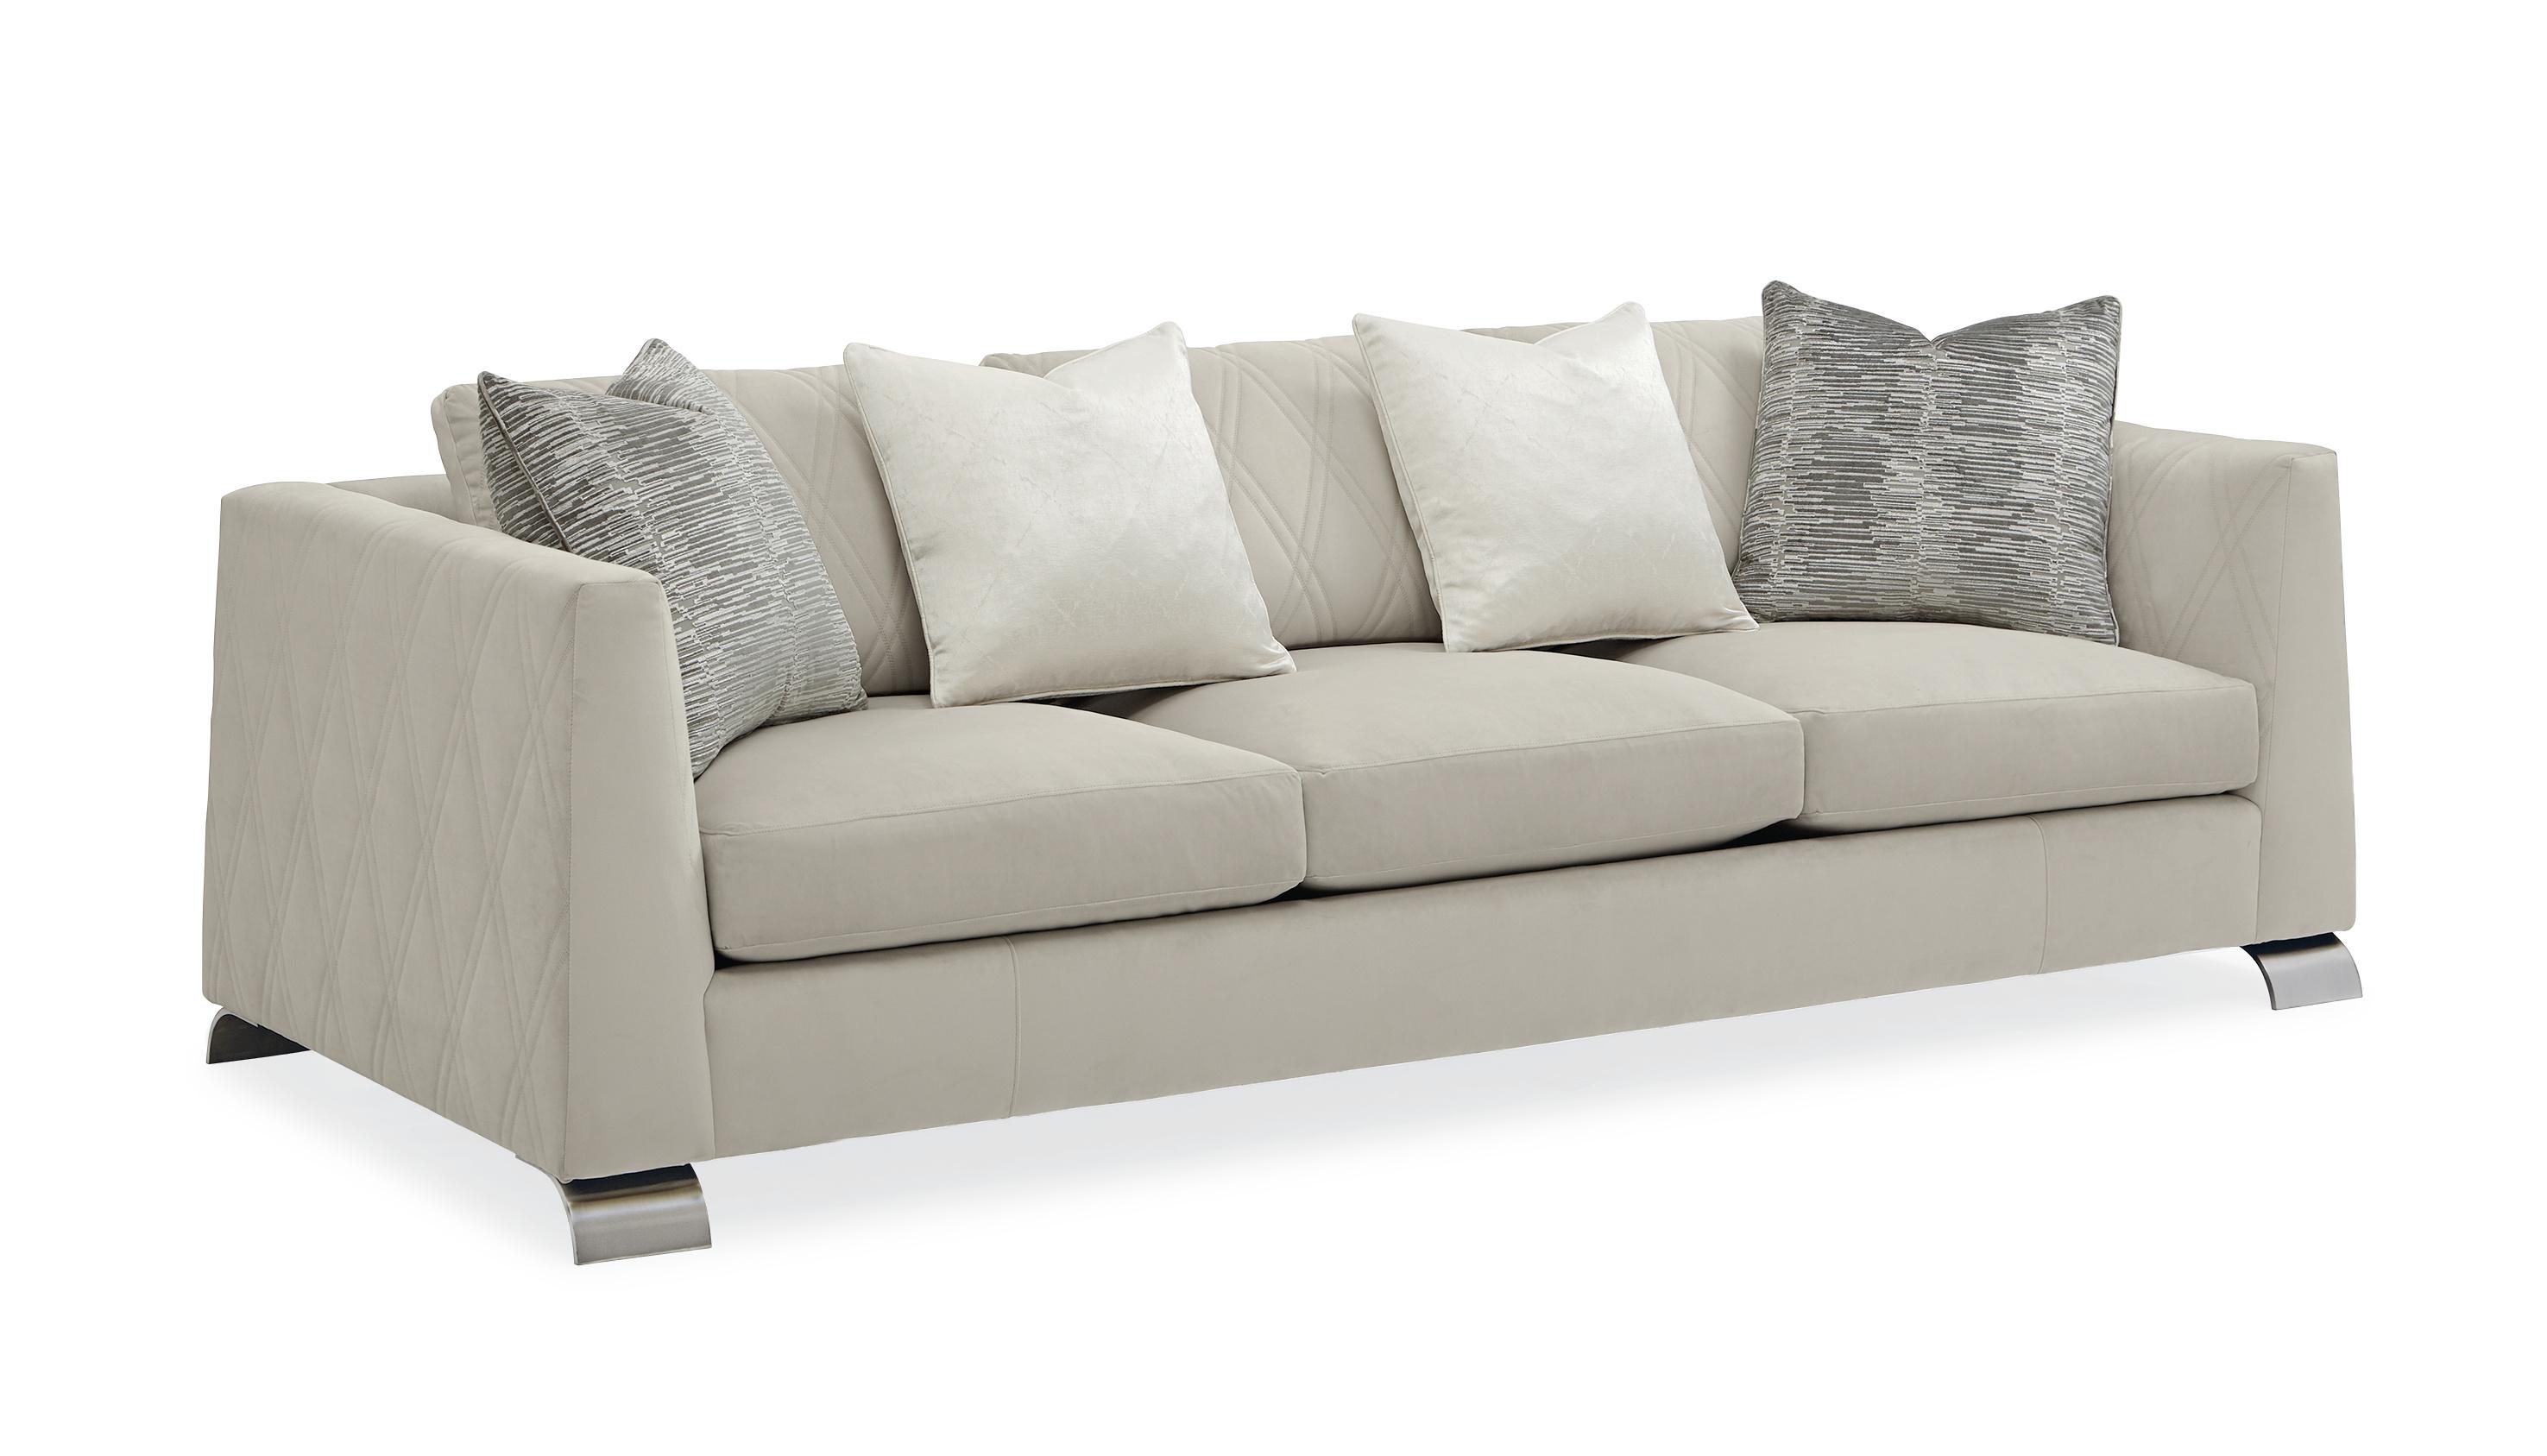 Traditional Sofa BEST FOOT FORWARD UPH-017-015-A in Light Gray Fabric